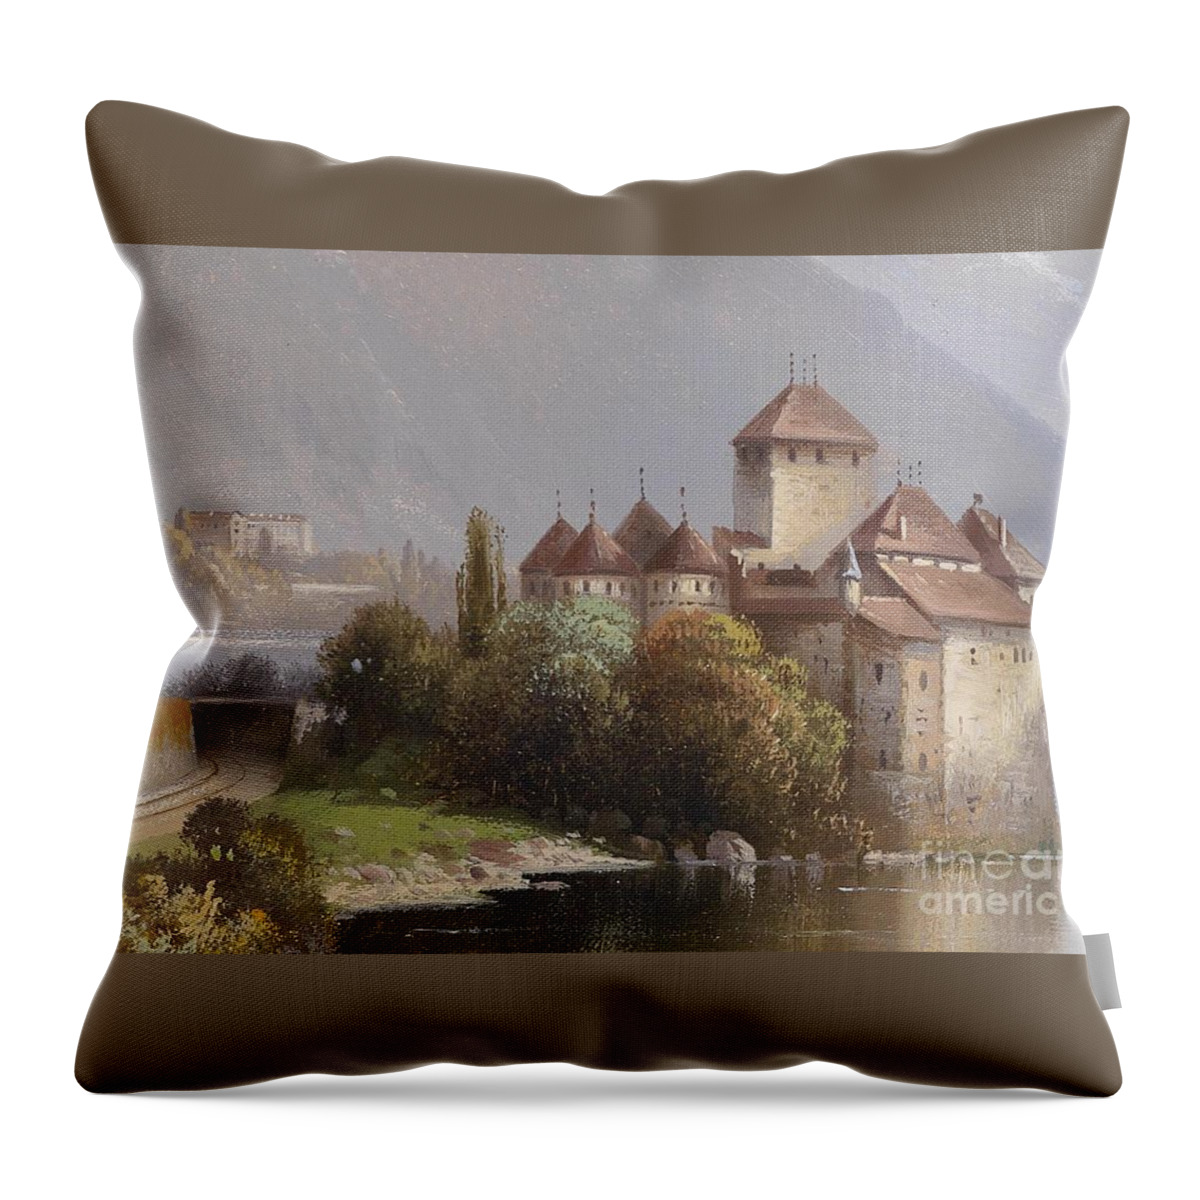 Hubert Sattler Throw Pillow featuring the painting Chillon Castle by MotionAge Designs